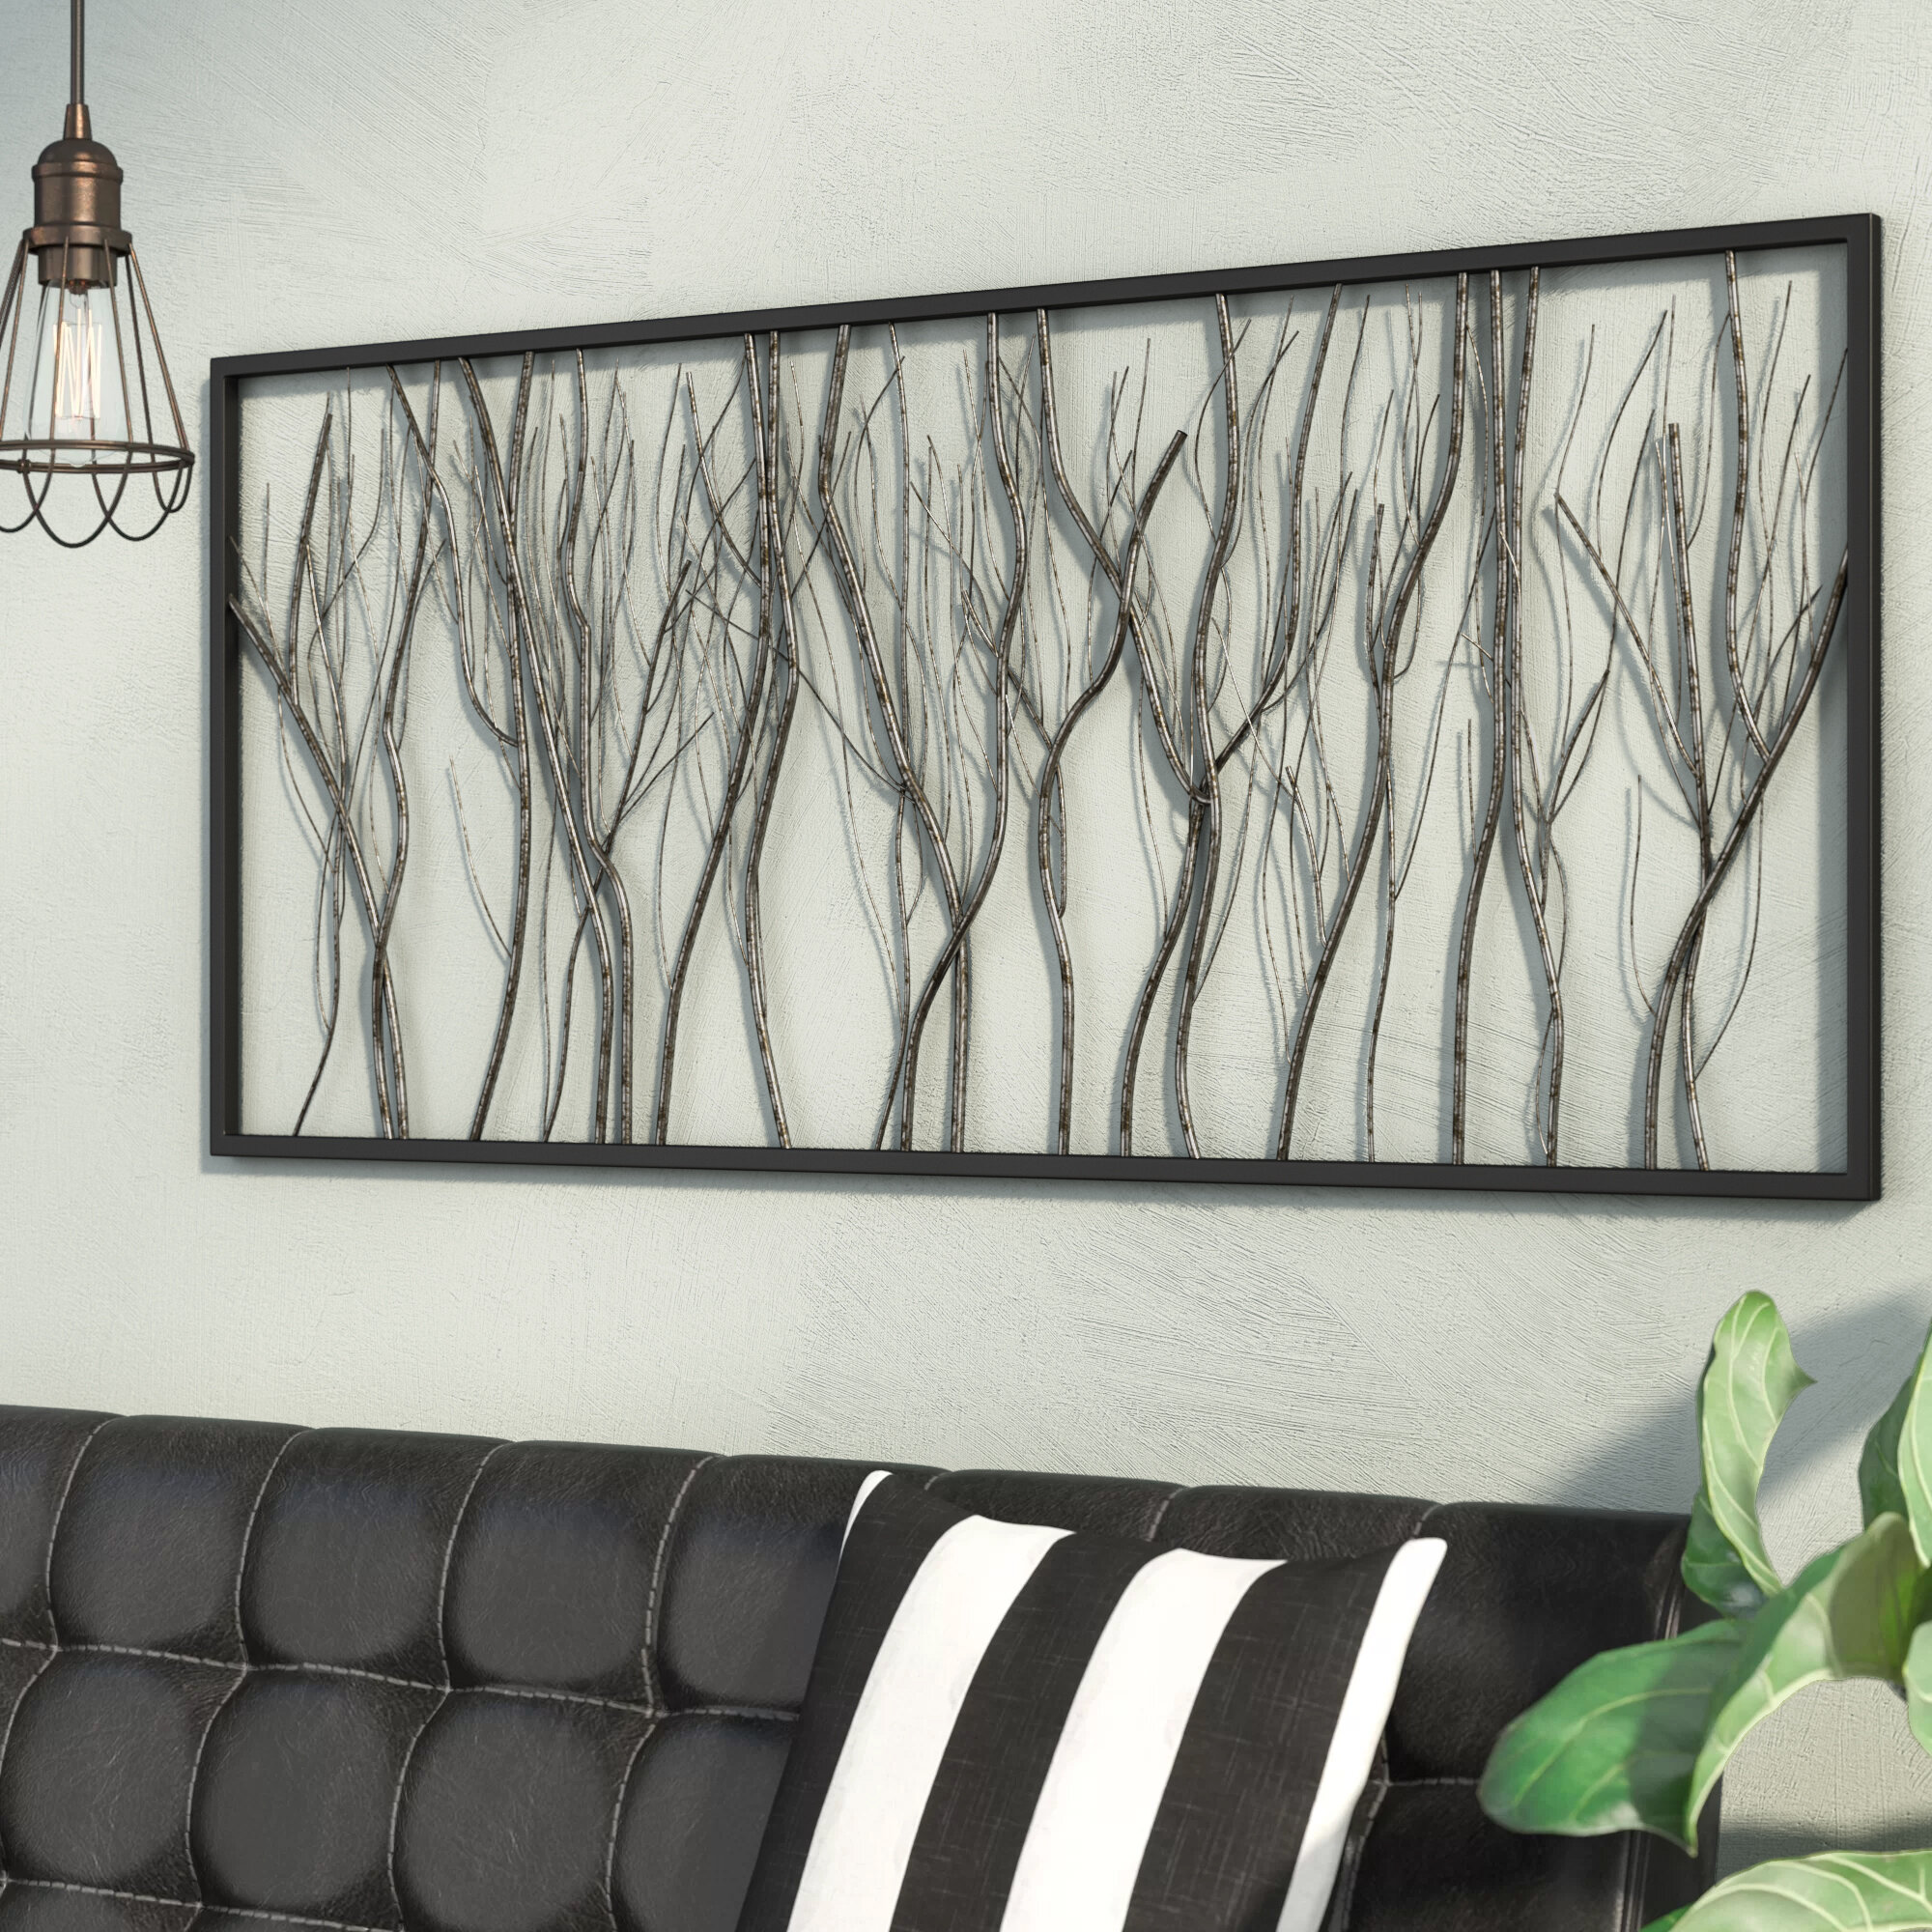 Metal Wall Decor You'll Love in 2023